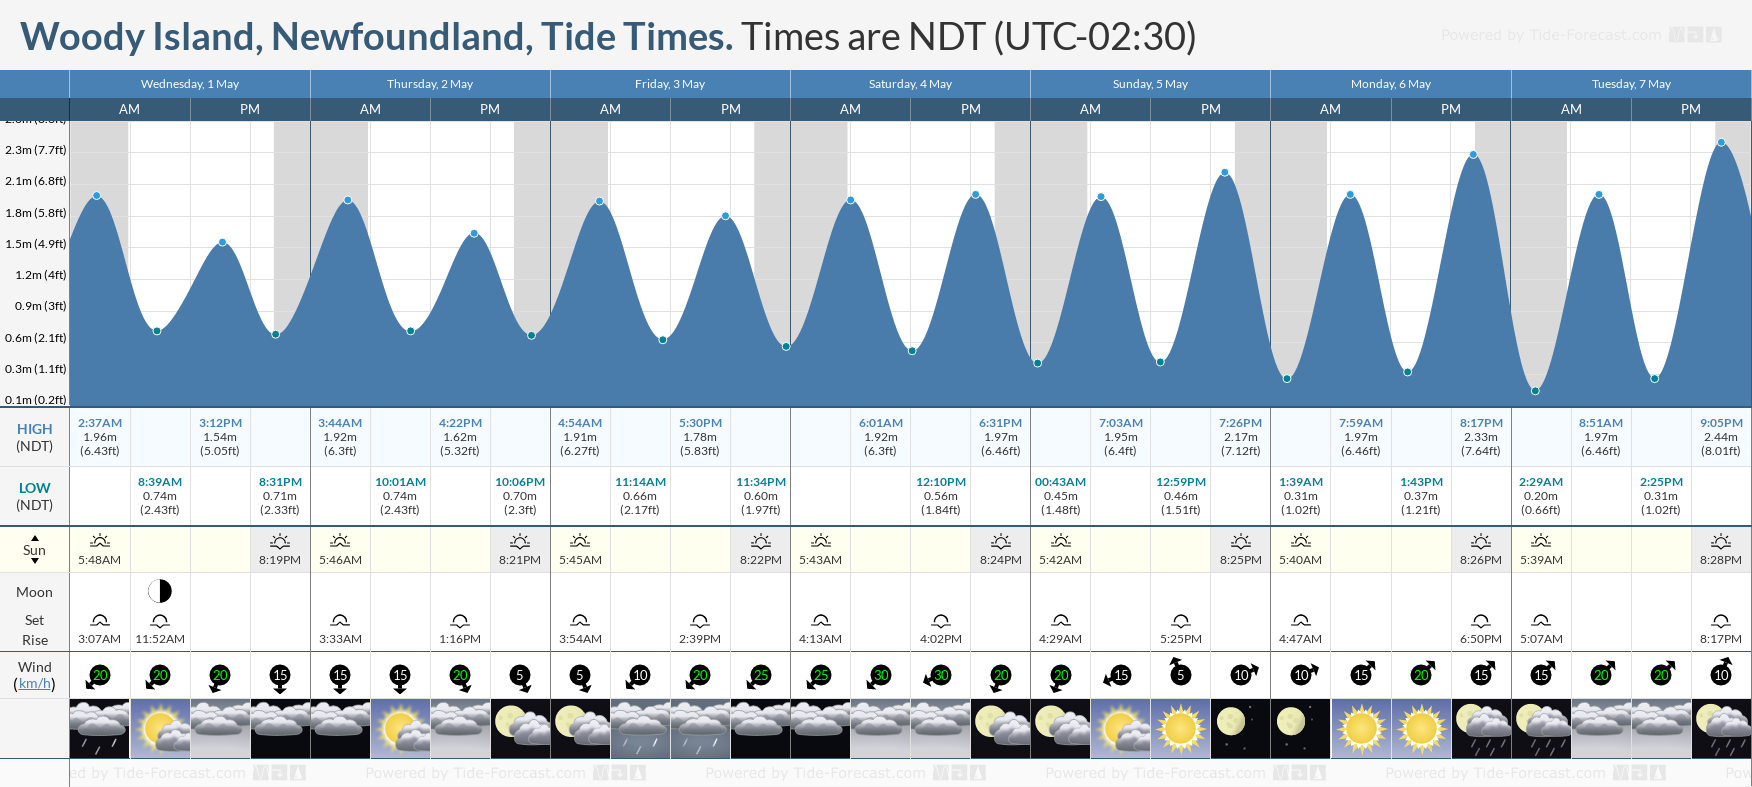 Woody Island, Newfoundland Tide Chart including high and low tide tide times for the next 7 days